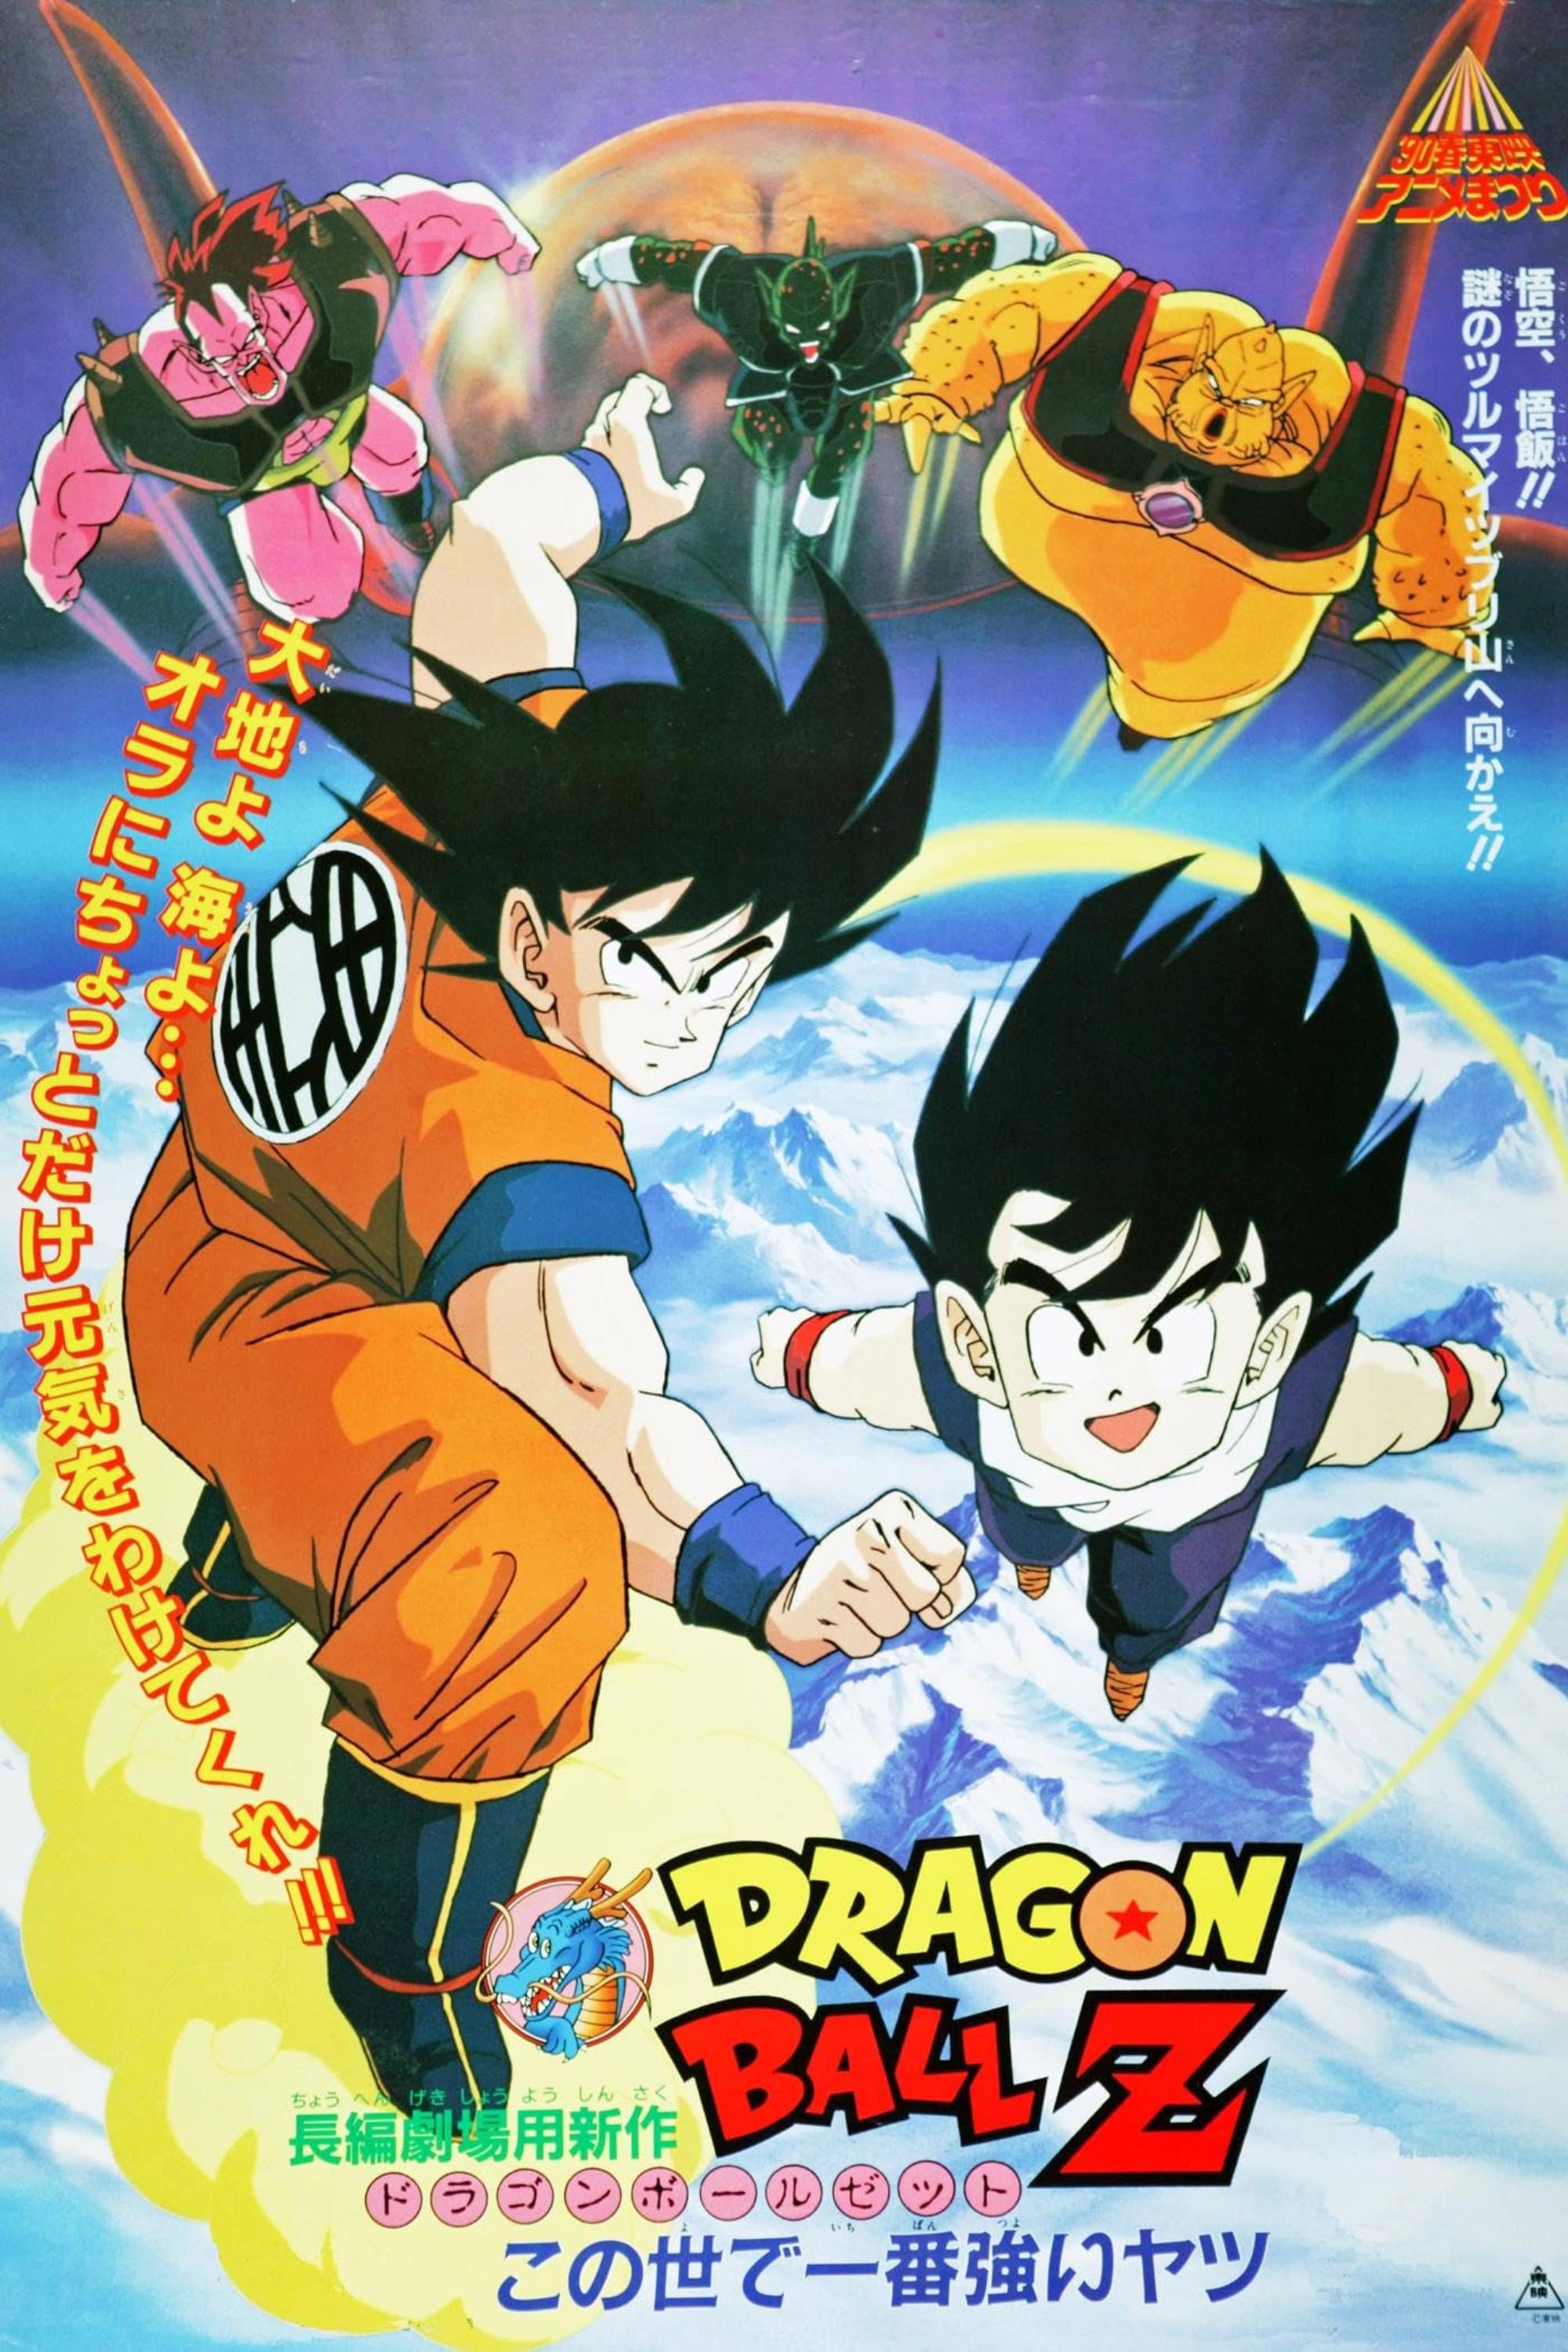 Dragon Ball Z The World’s Strongest Theatrical Poster